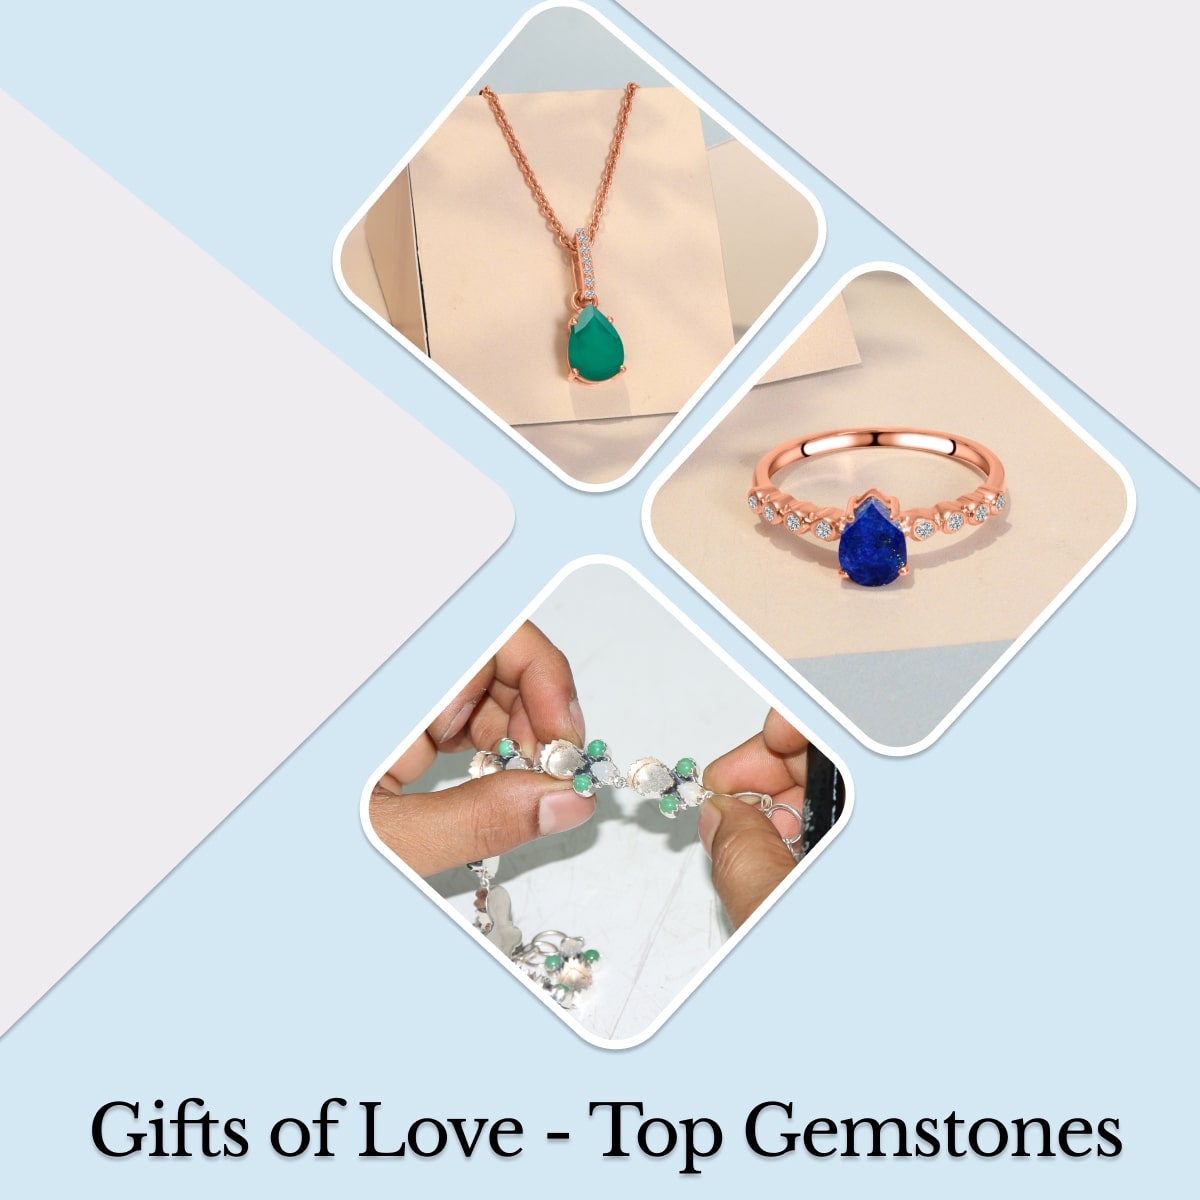 Top 5 Gemstone Jewelry That Can Be Gifted on Valentine’s Day